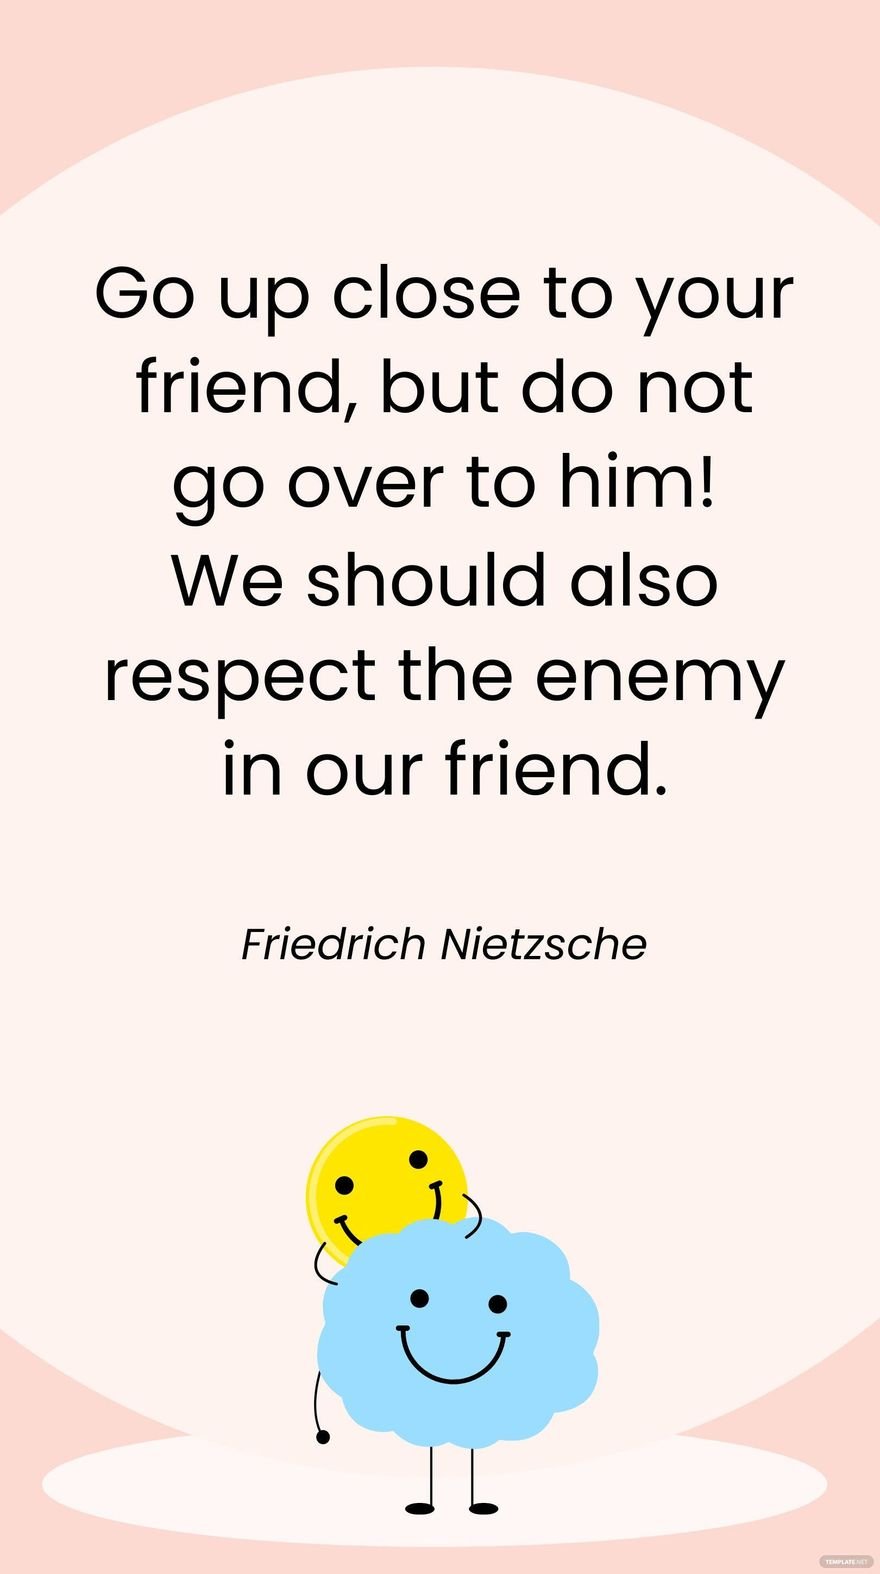 Friedrich Nietzsche - Go up close to your friend, but do not go over to him! We should also respect the enemy in our friend.